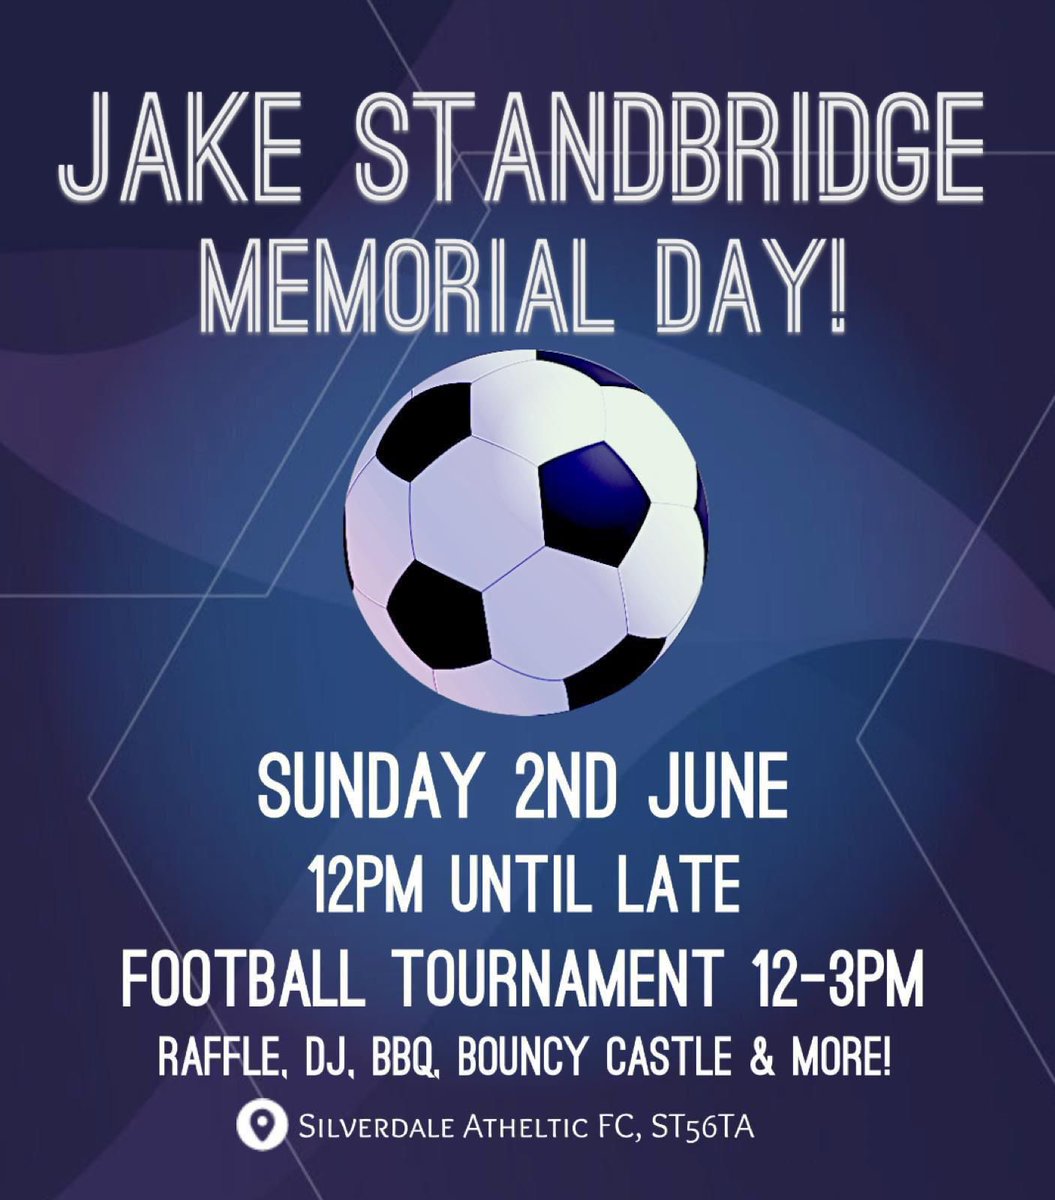 Every year we run a charity football day for our friend Jake who is sadly not with us anymore. Any donations (football shirts) / raffle prizes would be greatly appreciated 🙏🏻🙏🏻